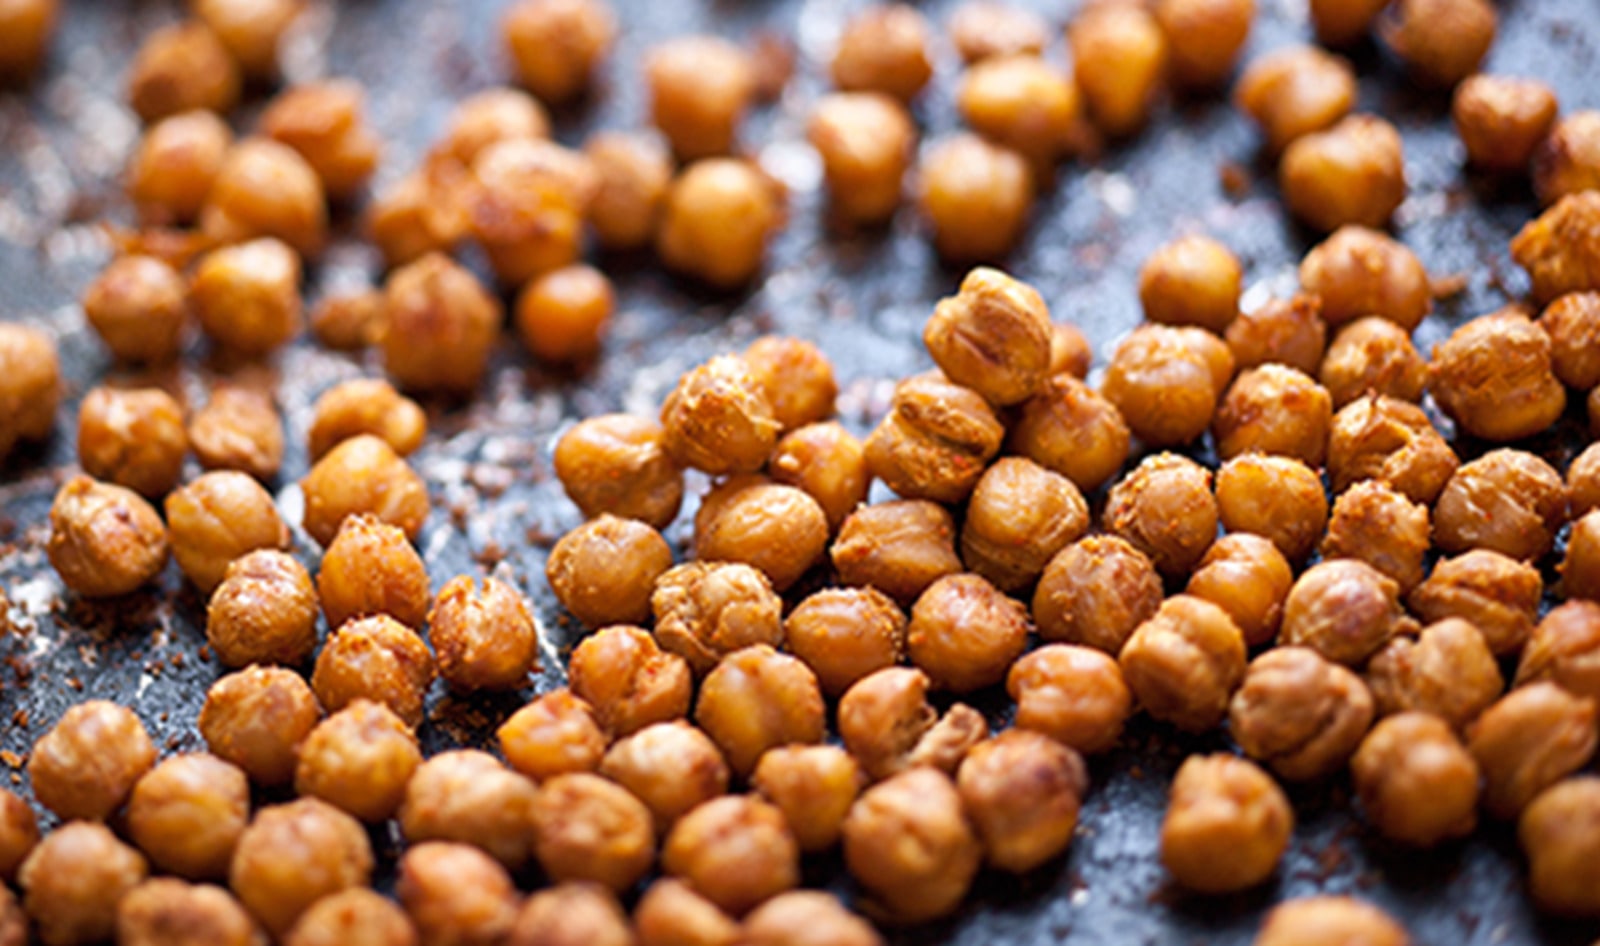 Chickpea Startup Raises $4.25 Million to Replace Meat and Dairy